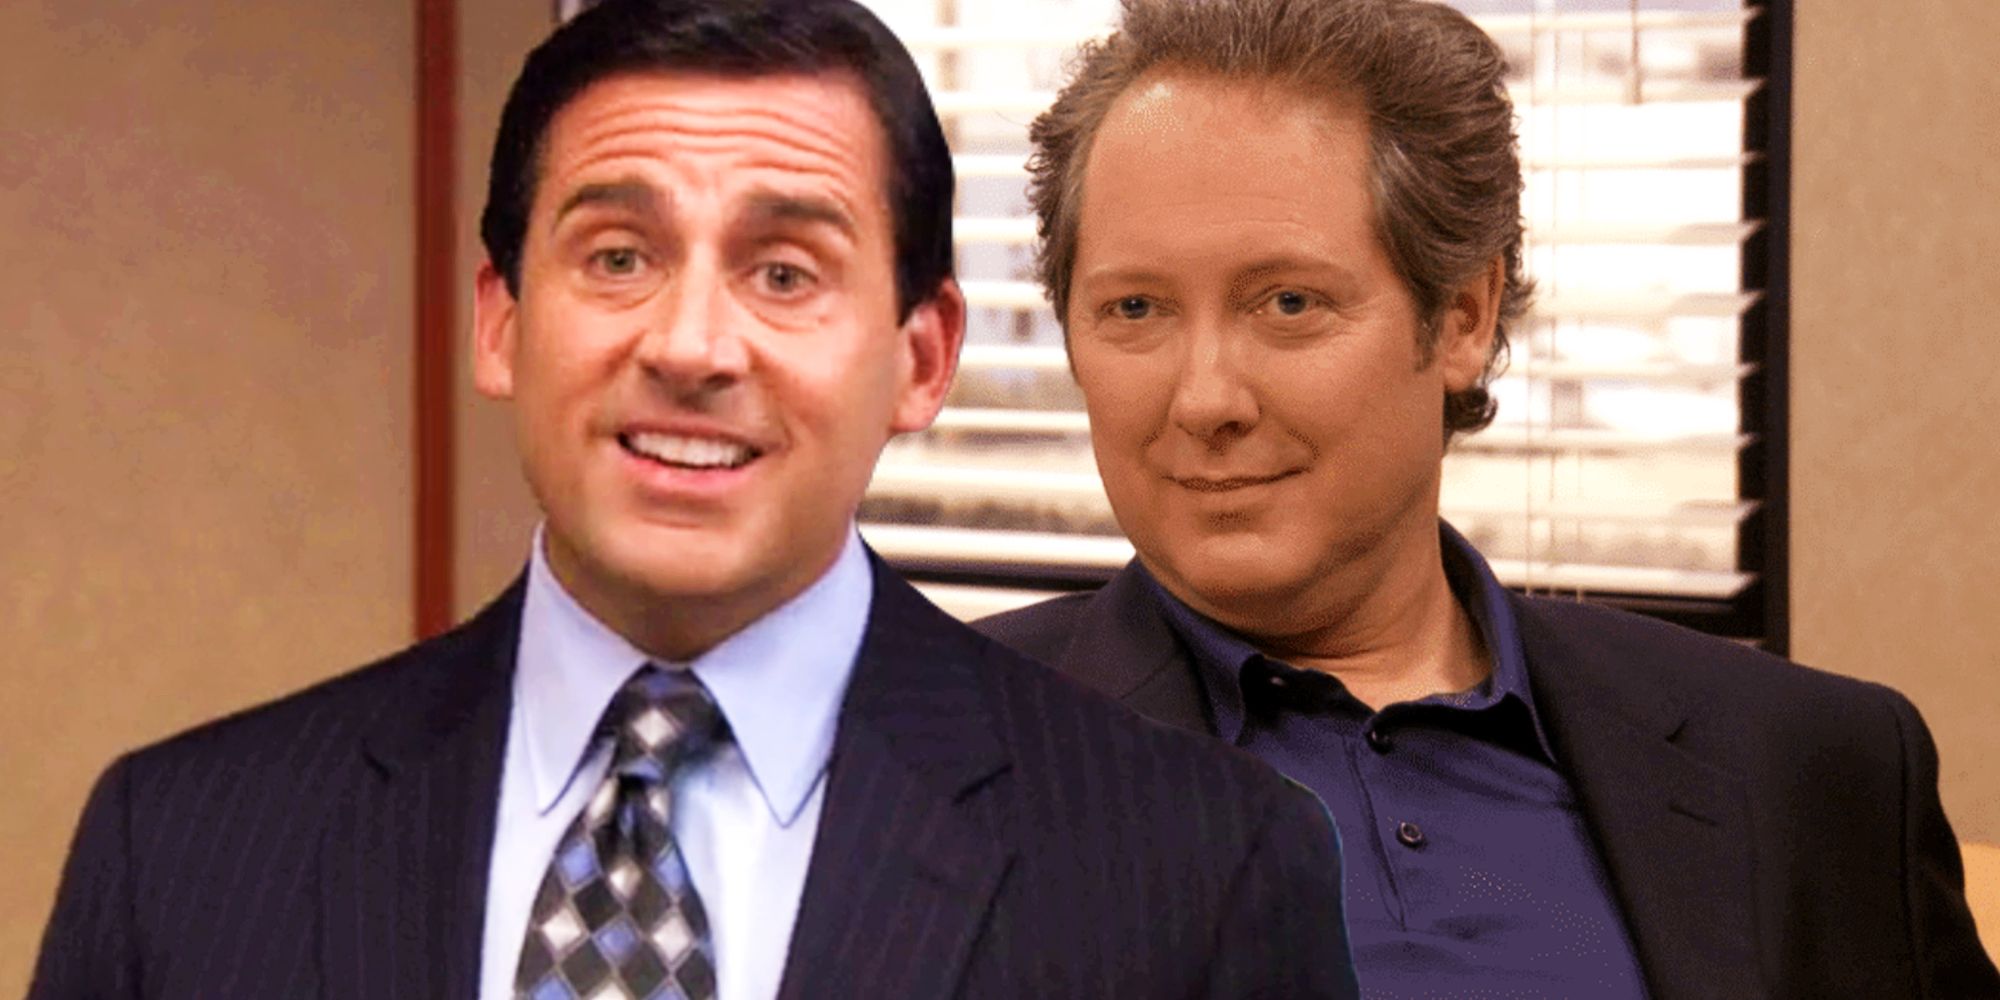 Steve Carell as Michael Scott and James Spader as Robert California in The Office